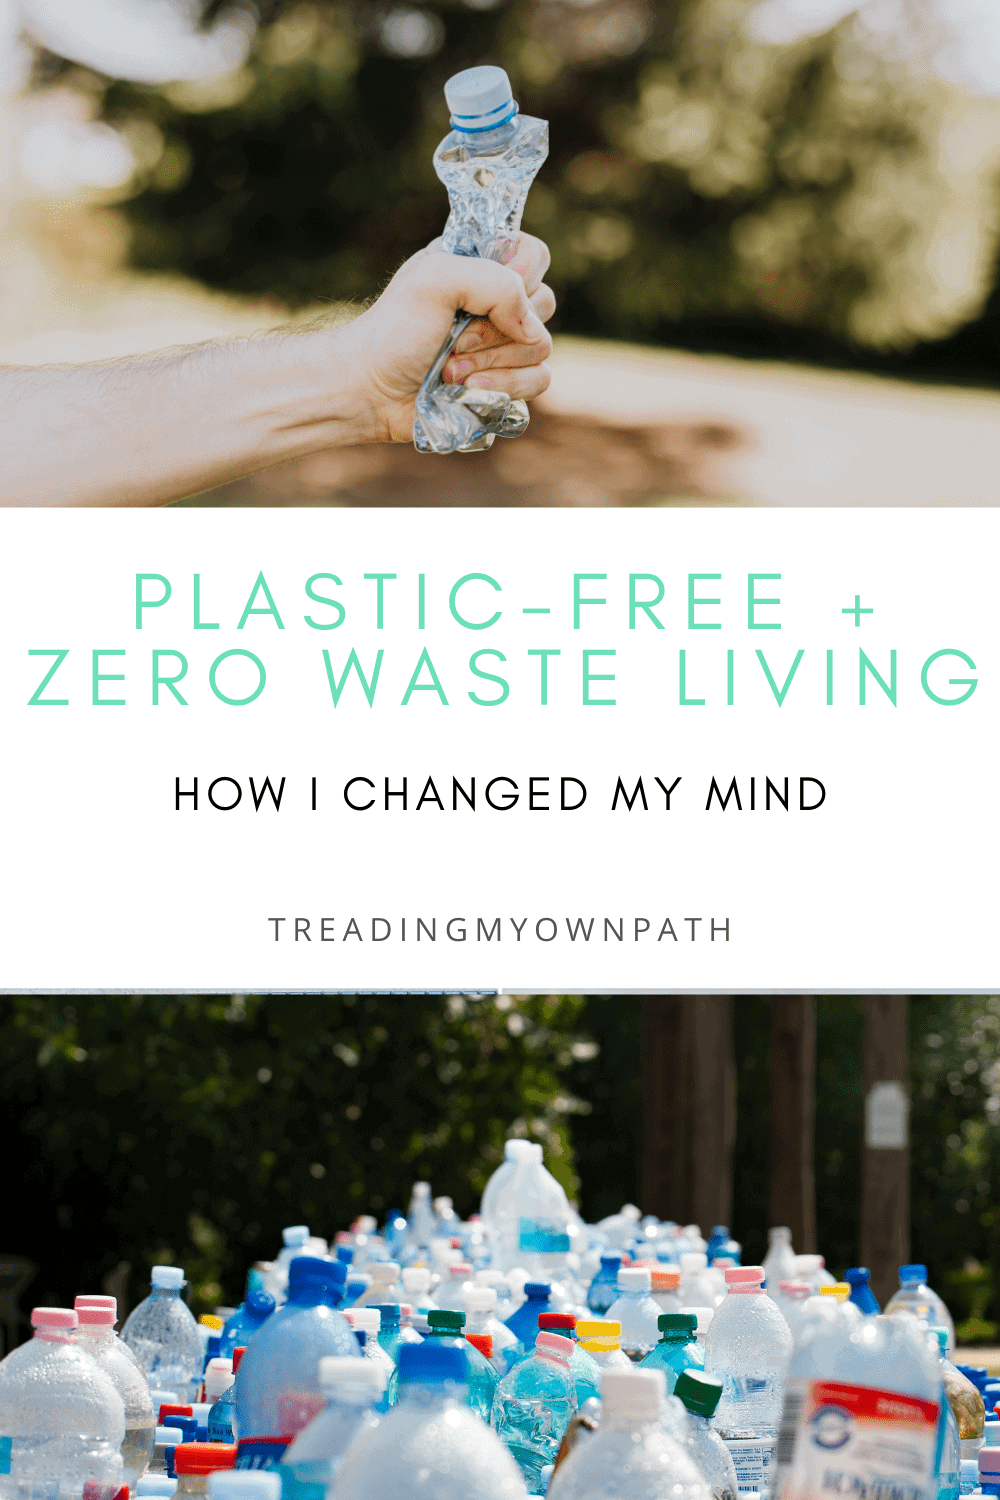 How I changed my mind about living zero waste and plastic-free (a story in 5 stages)